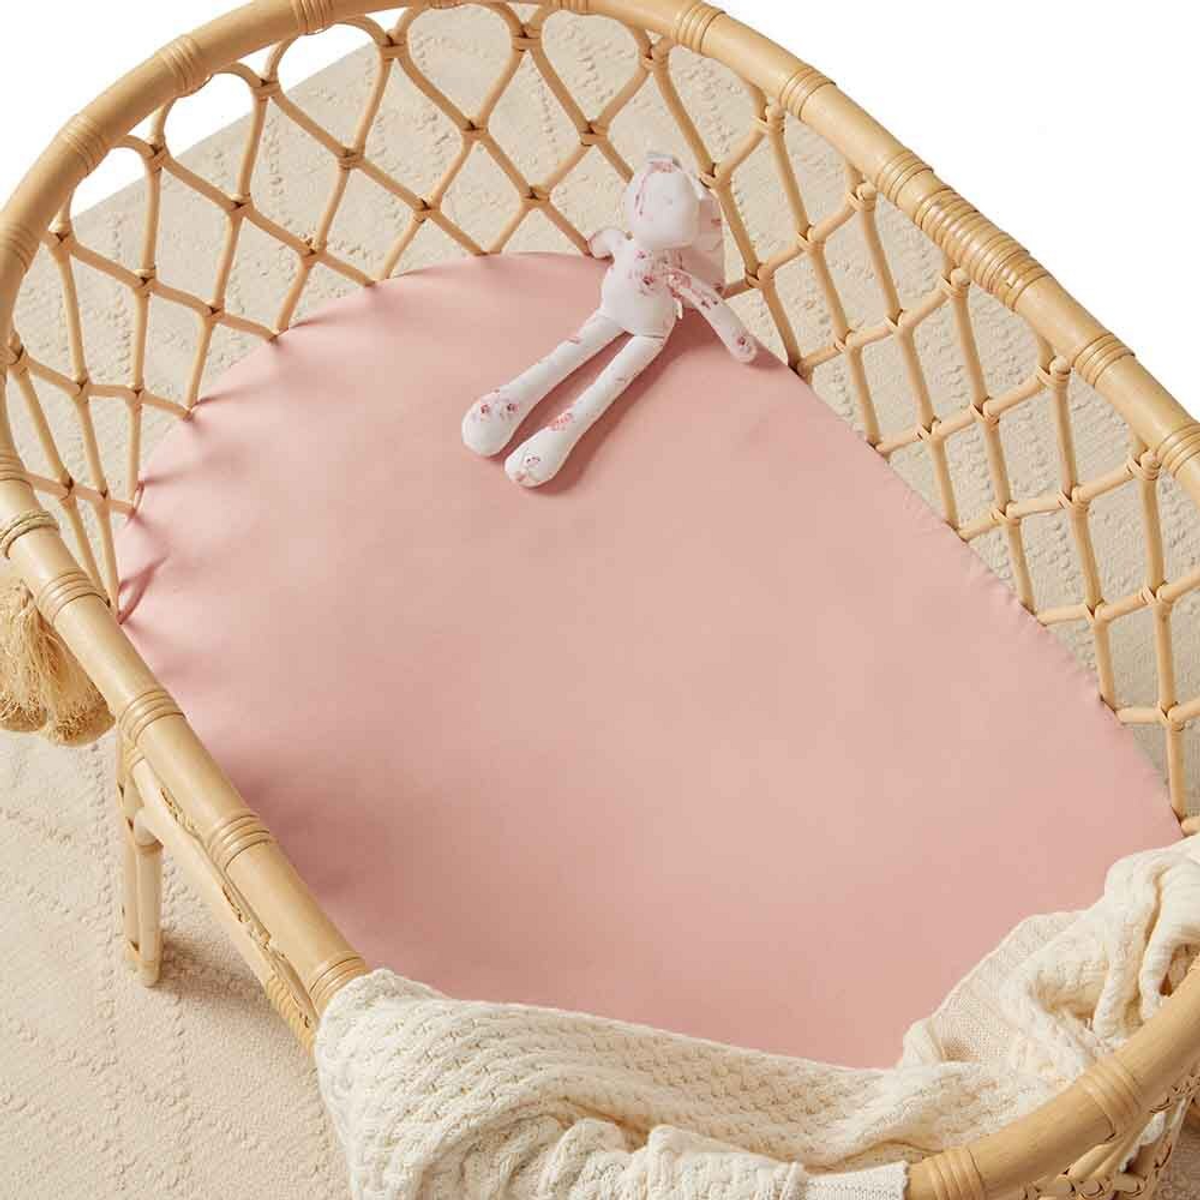 SNUGGLE HUNNY KIDS BASSINET SHEET / CHANGE PAD COVER - LULLABY PINK 